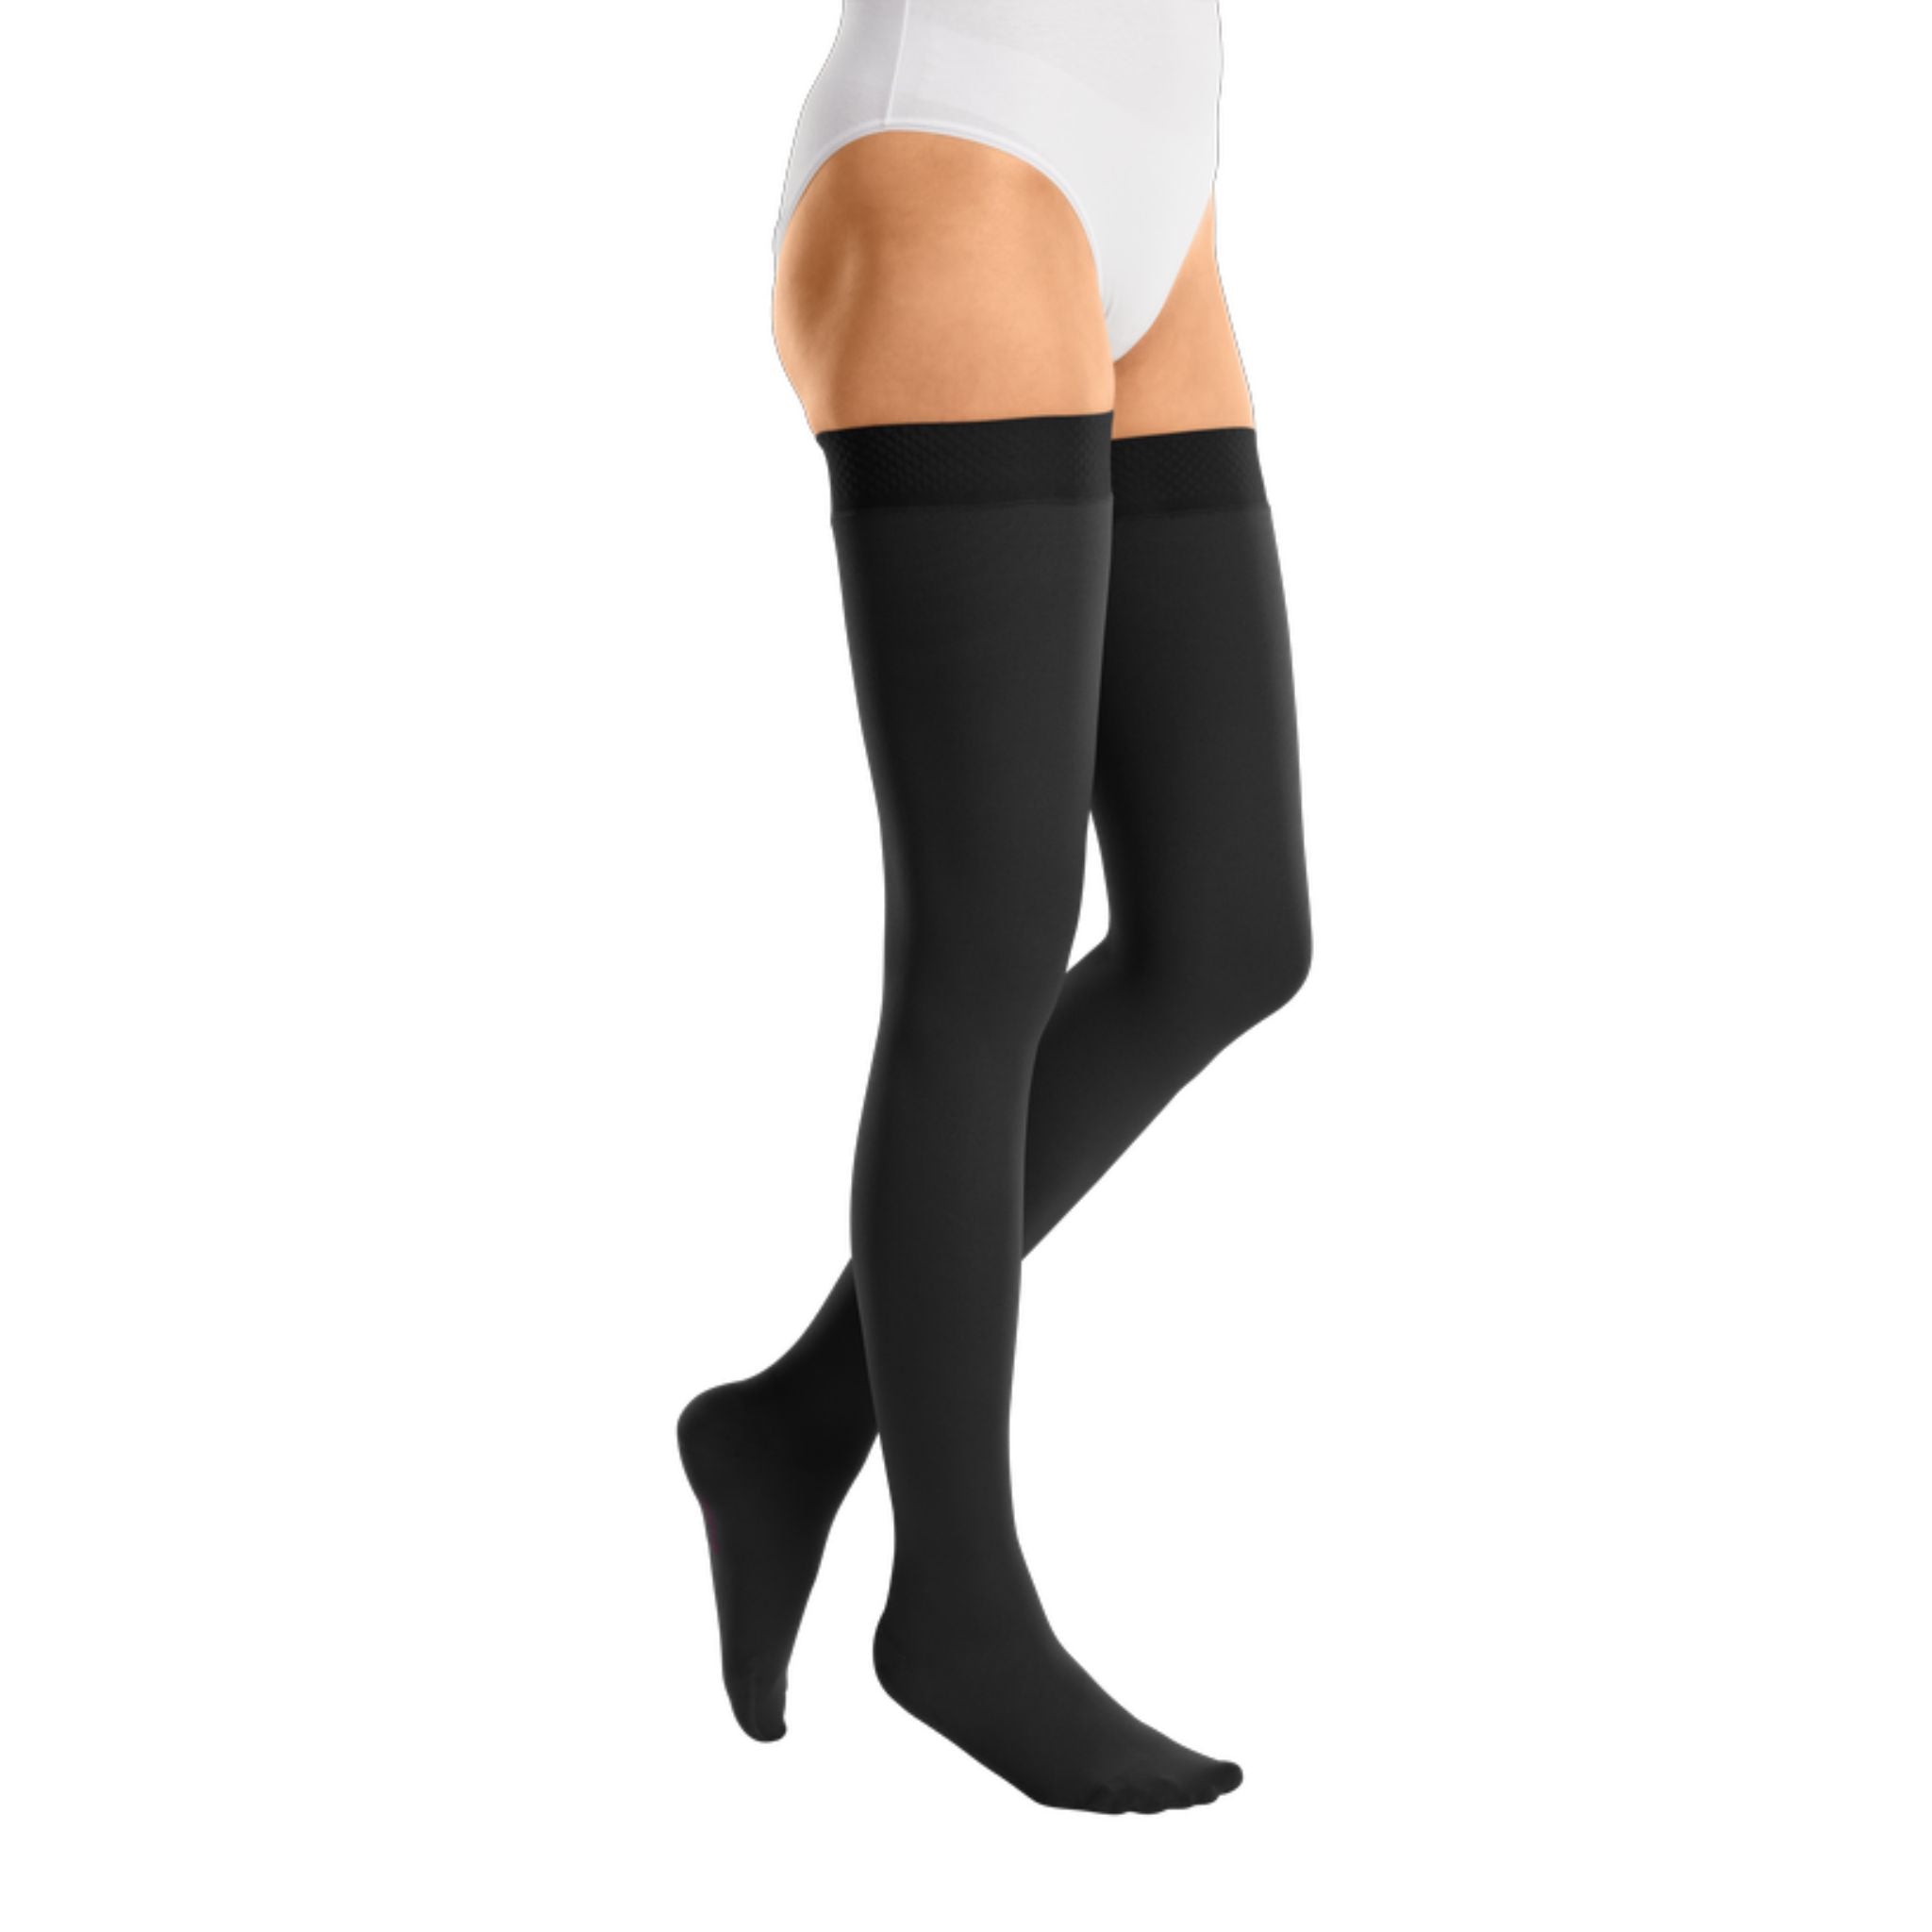 Compression Stockings | Thigh High | Closed Toe | Sensitive Topband | Black | mediven cotton